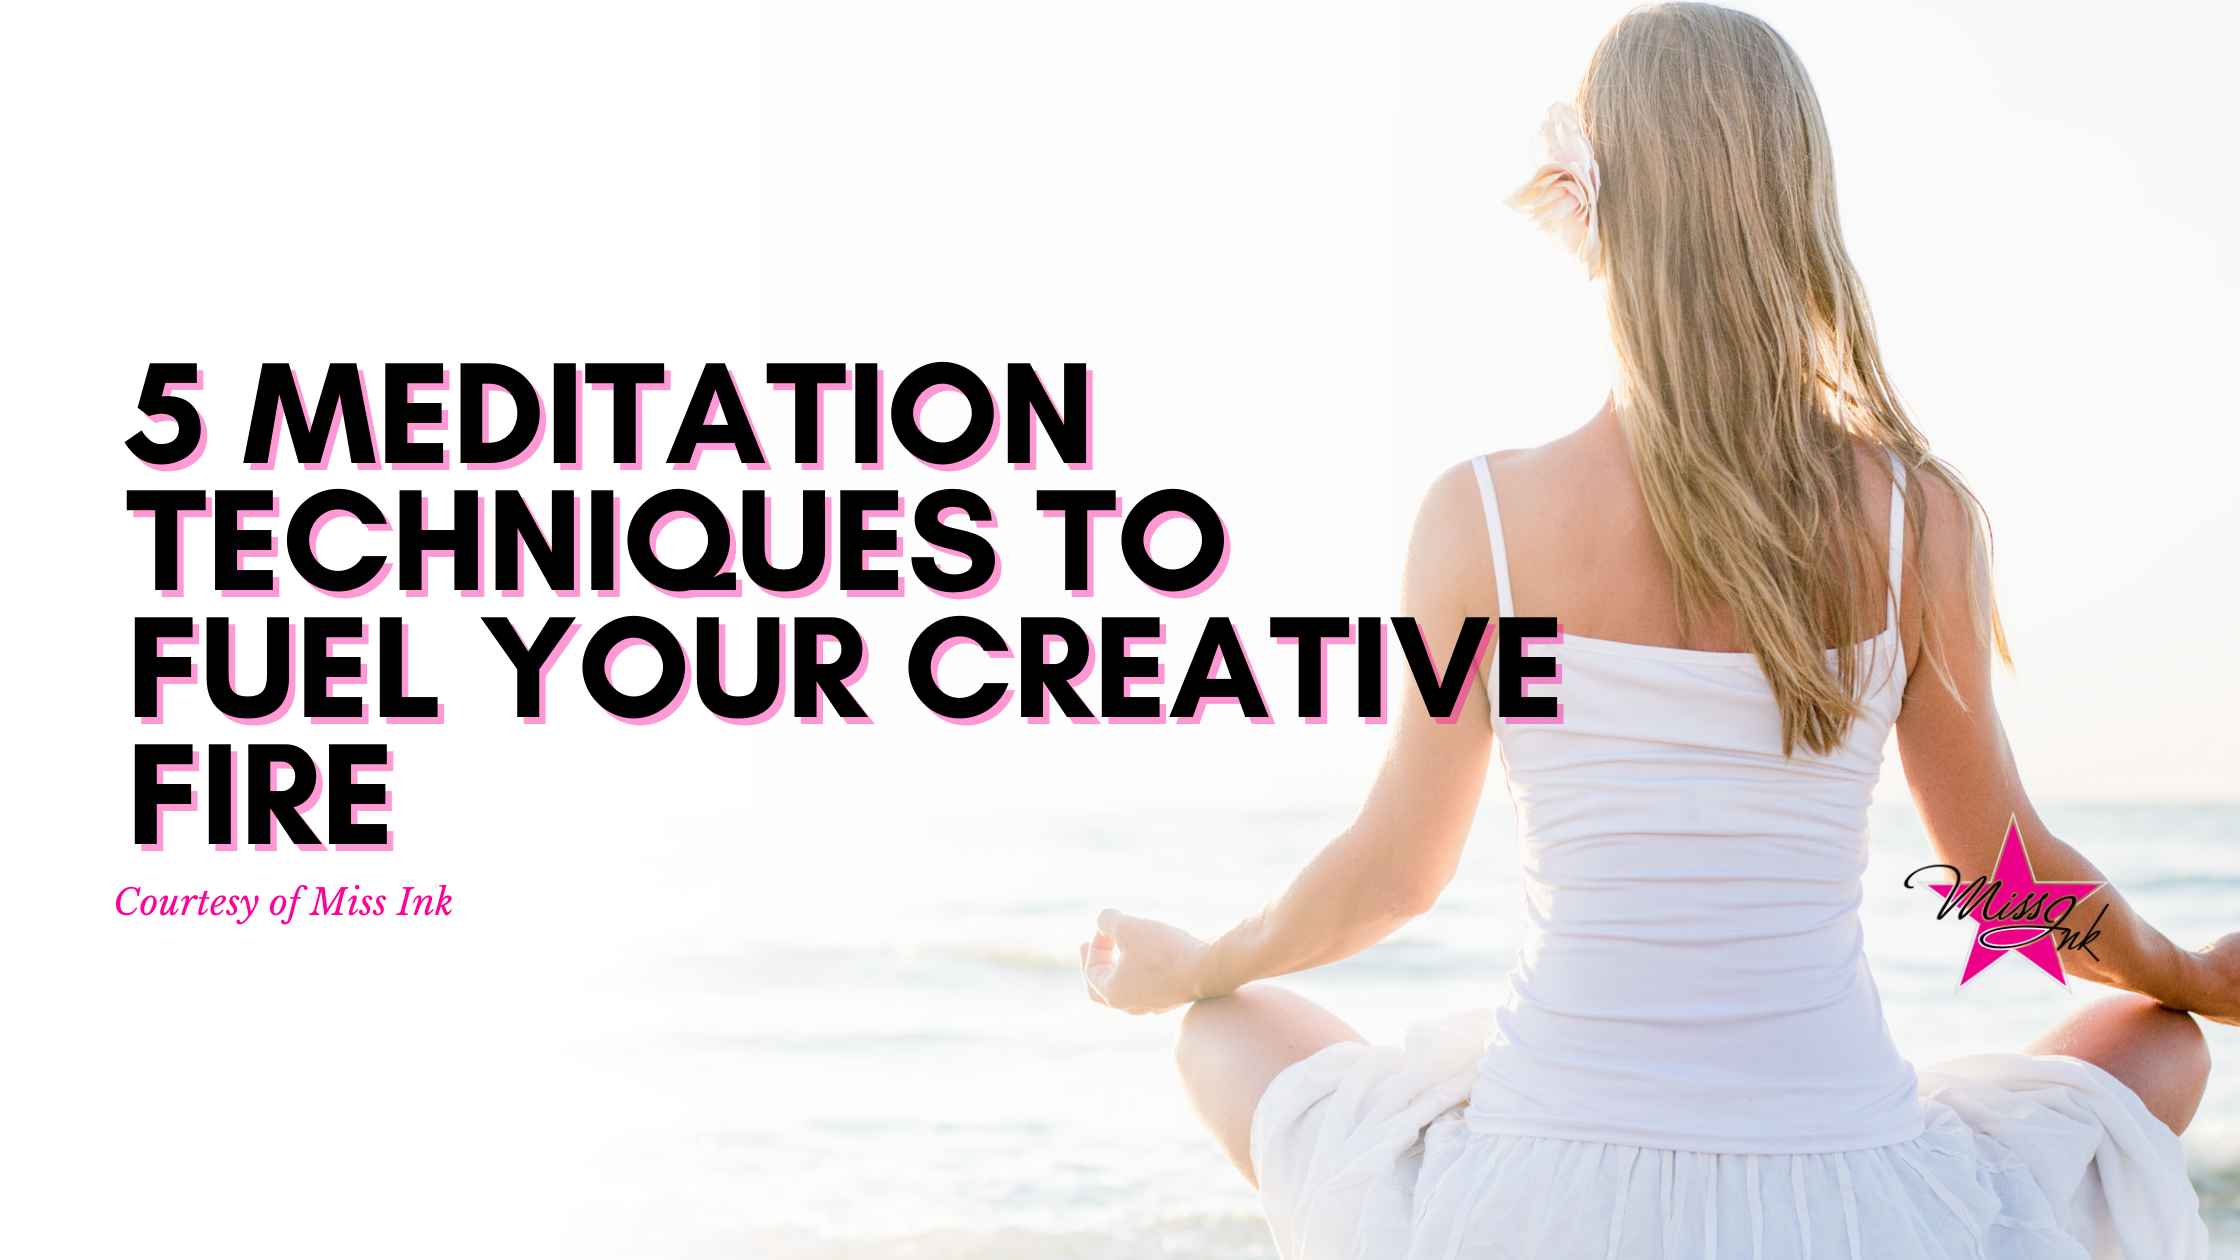 5 Meditation Techniques to Fuel Your Creative Fire